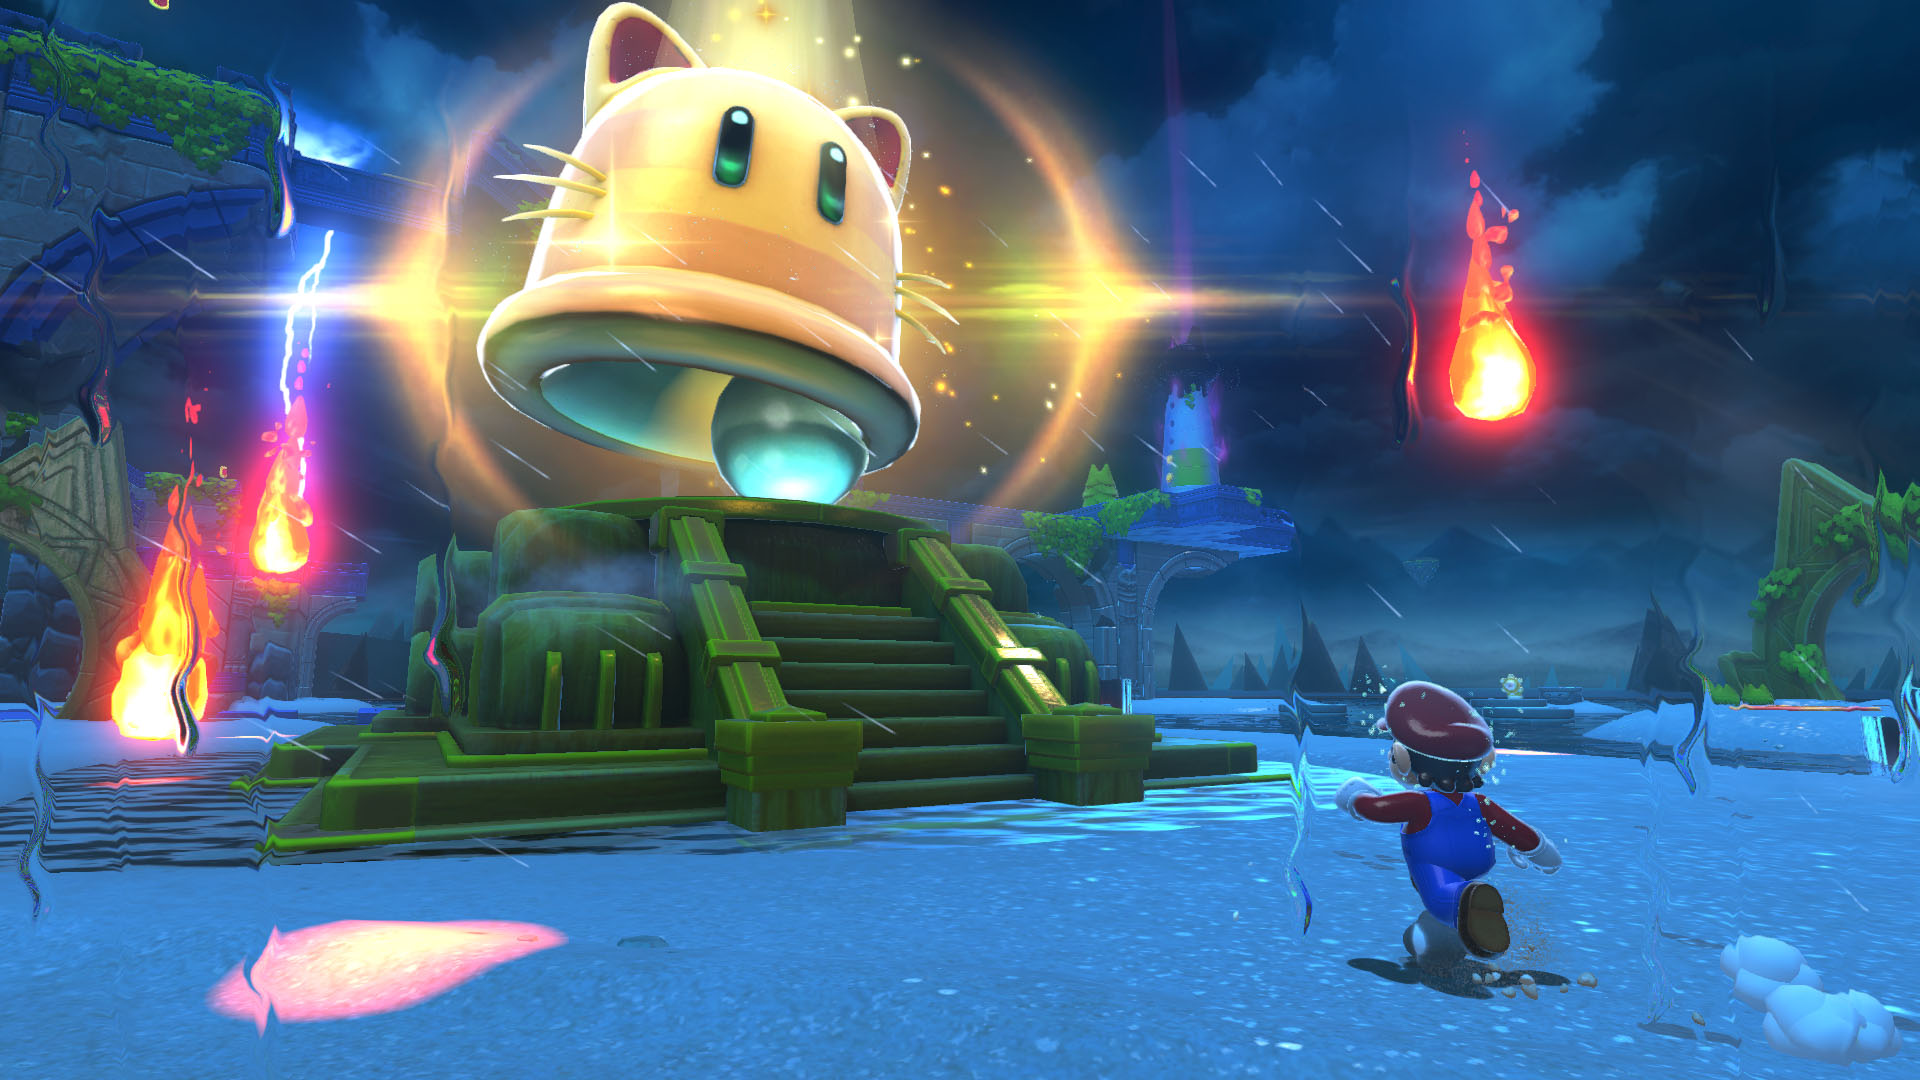 Video Game Super Mario 3D World + Bowser’s Fury HD Wallpaper | Background Image